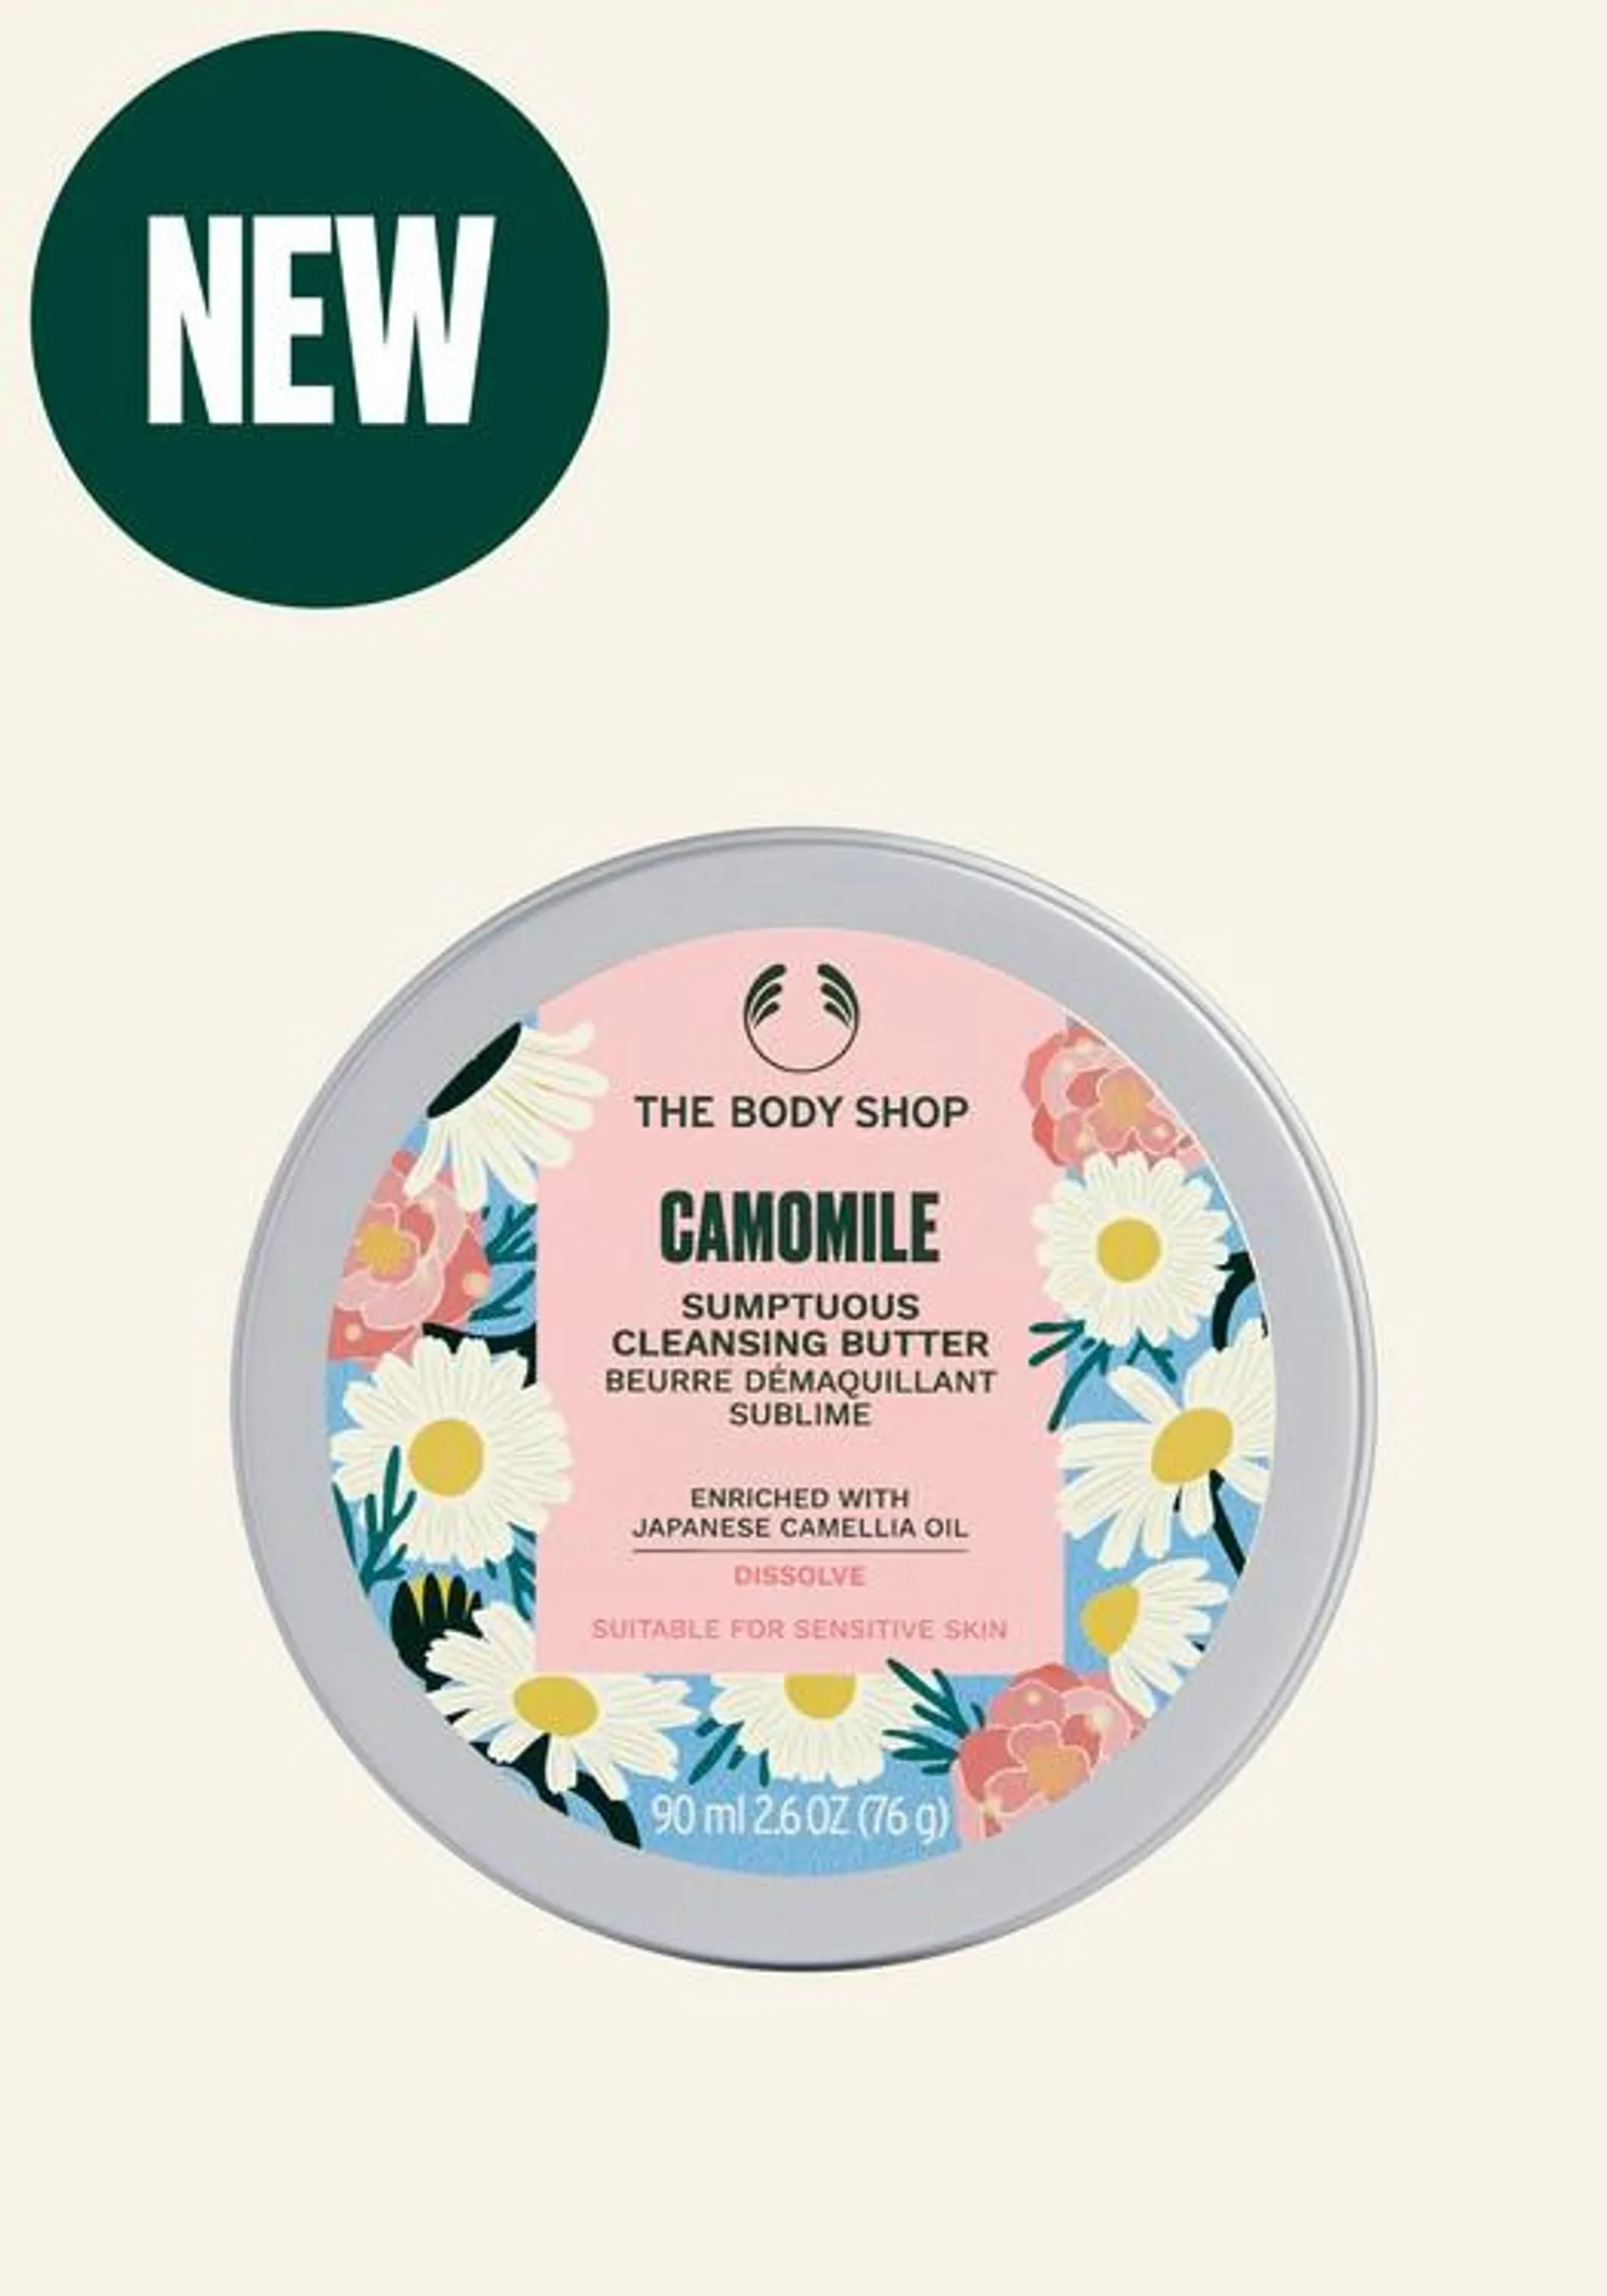 Camomile Sumptuous Cleansing Butter – Camellia Limited Edition